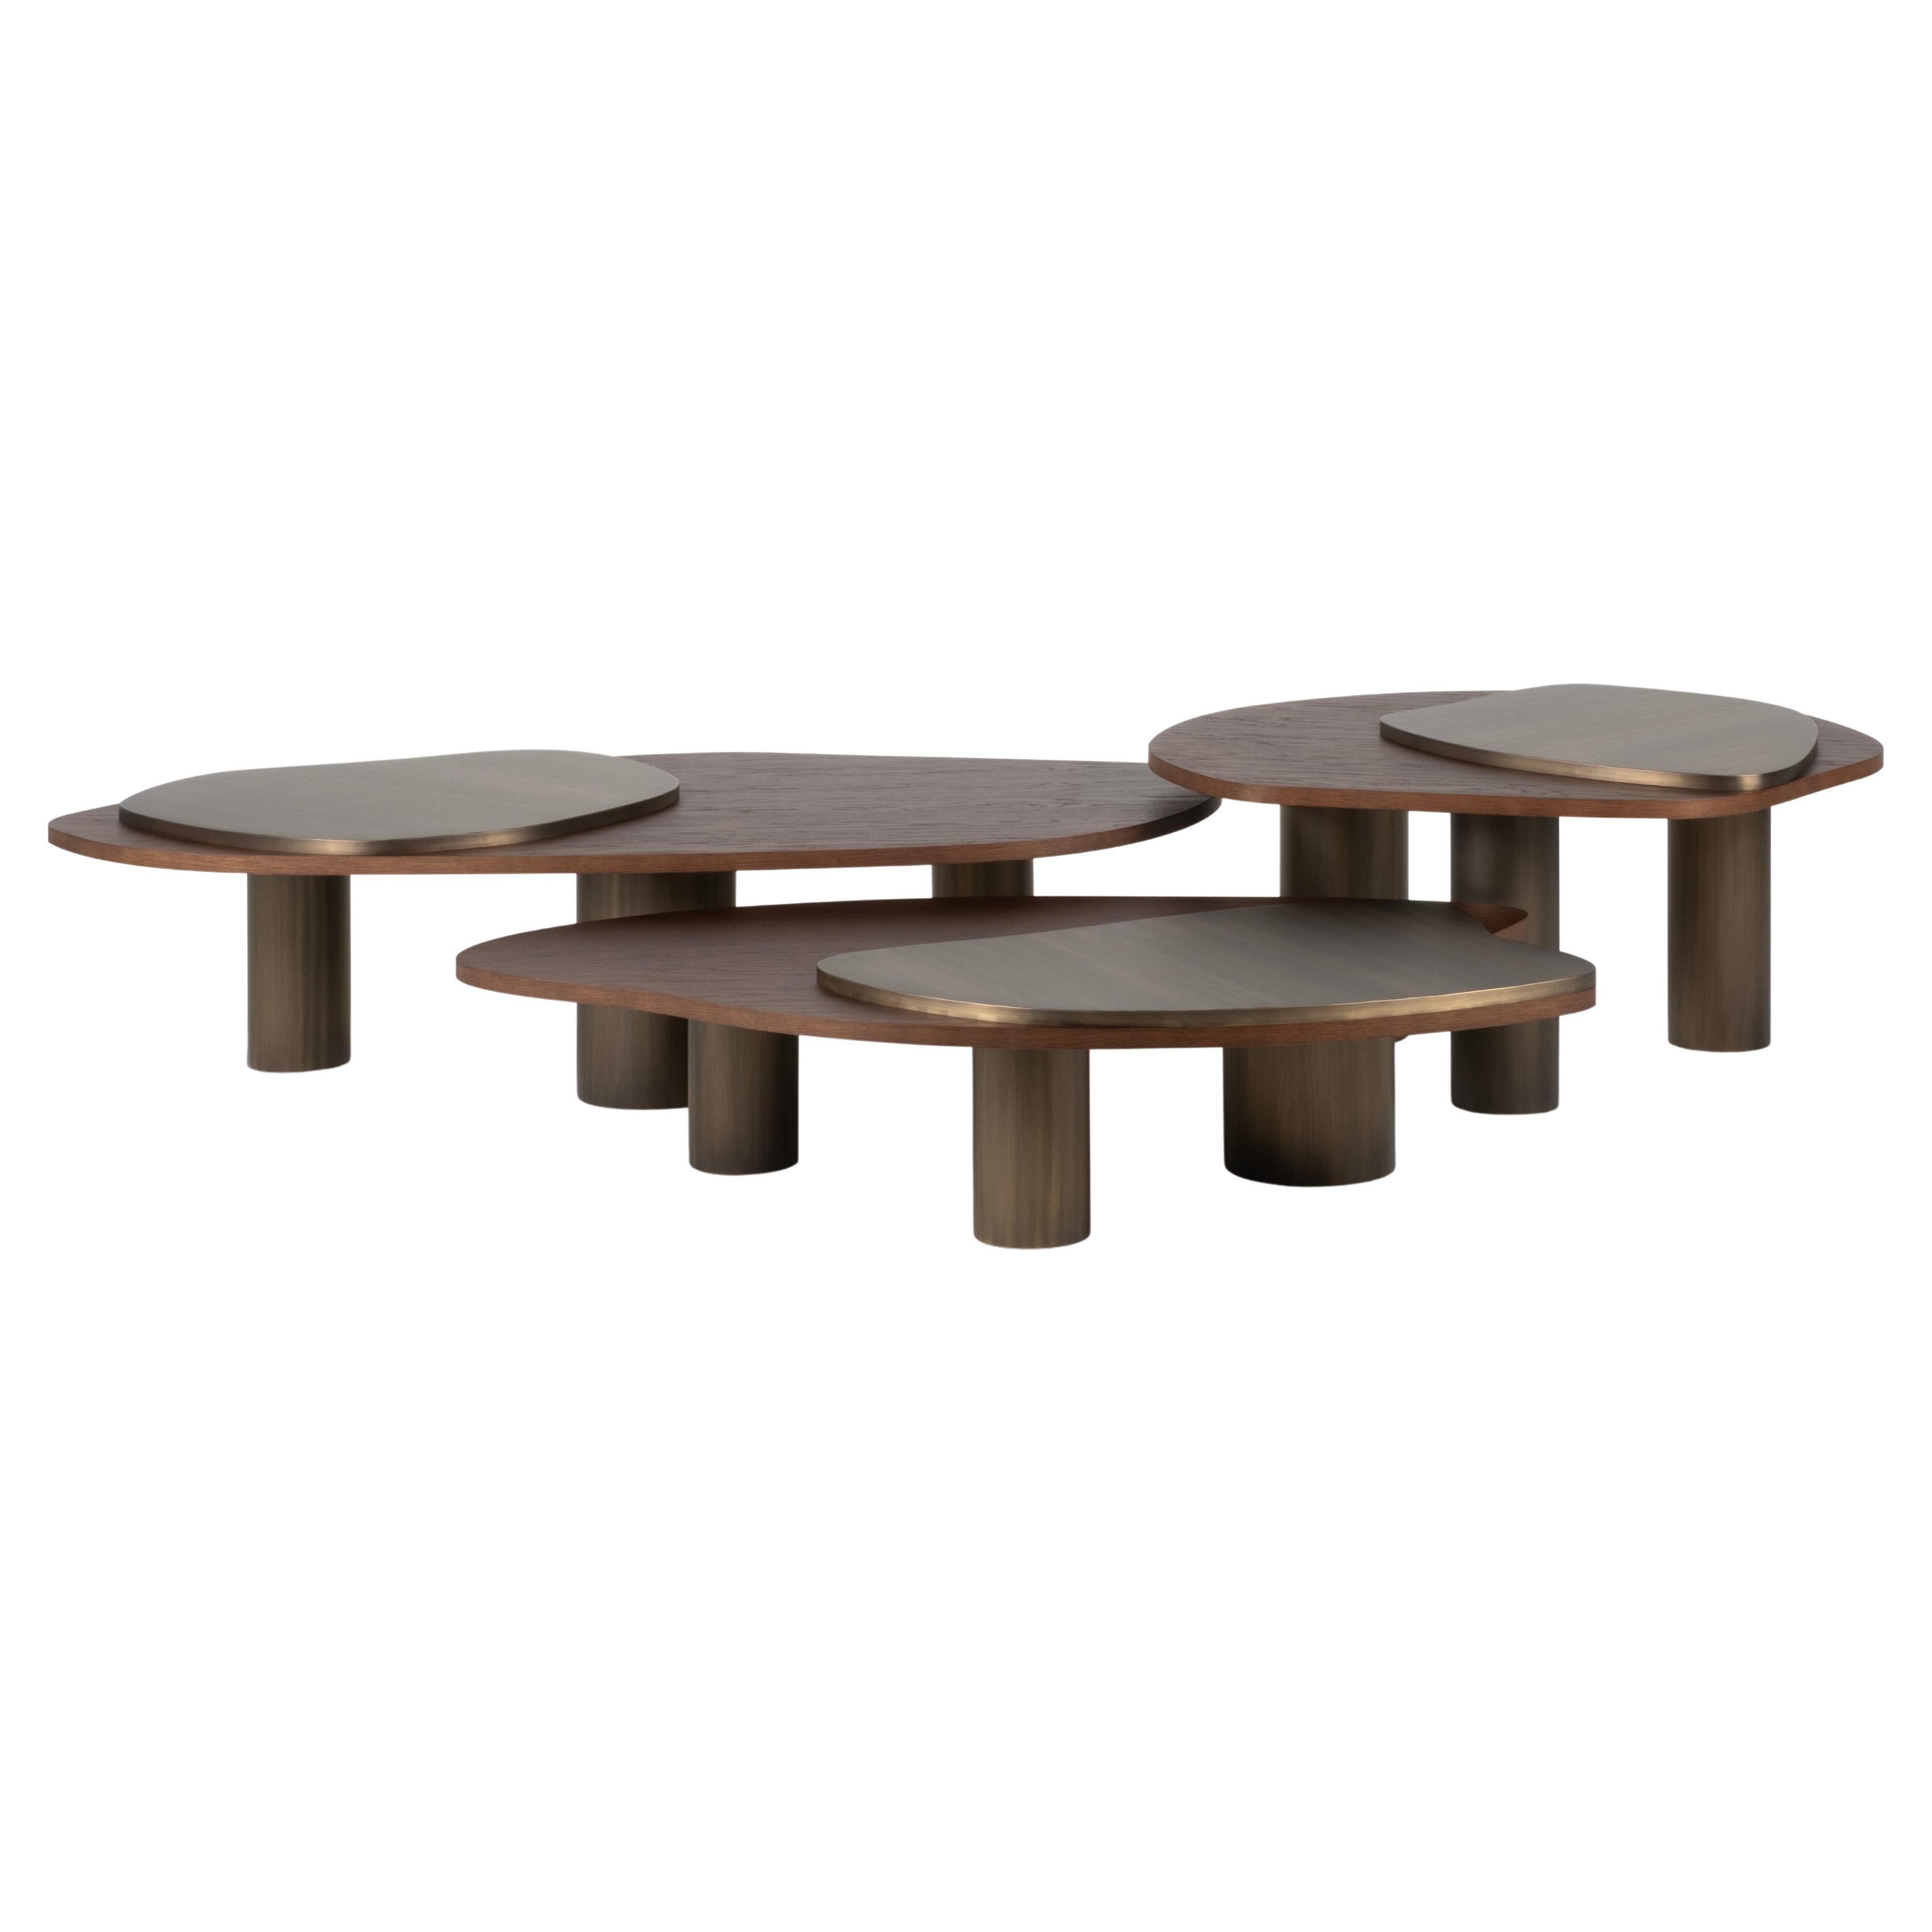 Landscape Coffee Tables, Contemporary Collection, Handcrafted in Portugal - Europe by Greenapple.

Designed by Rute Martins for the Contemporary Collection, the Landscape coffee table is inspired by fluid lines in nature, adding a representation of